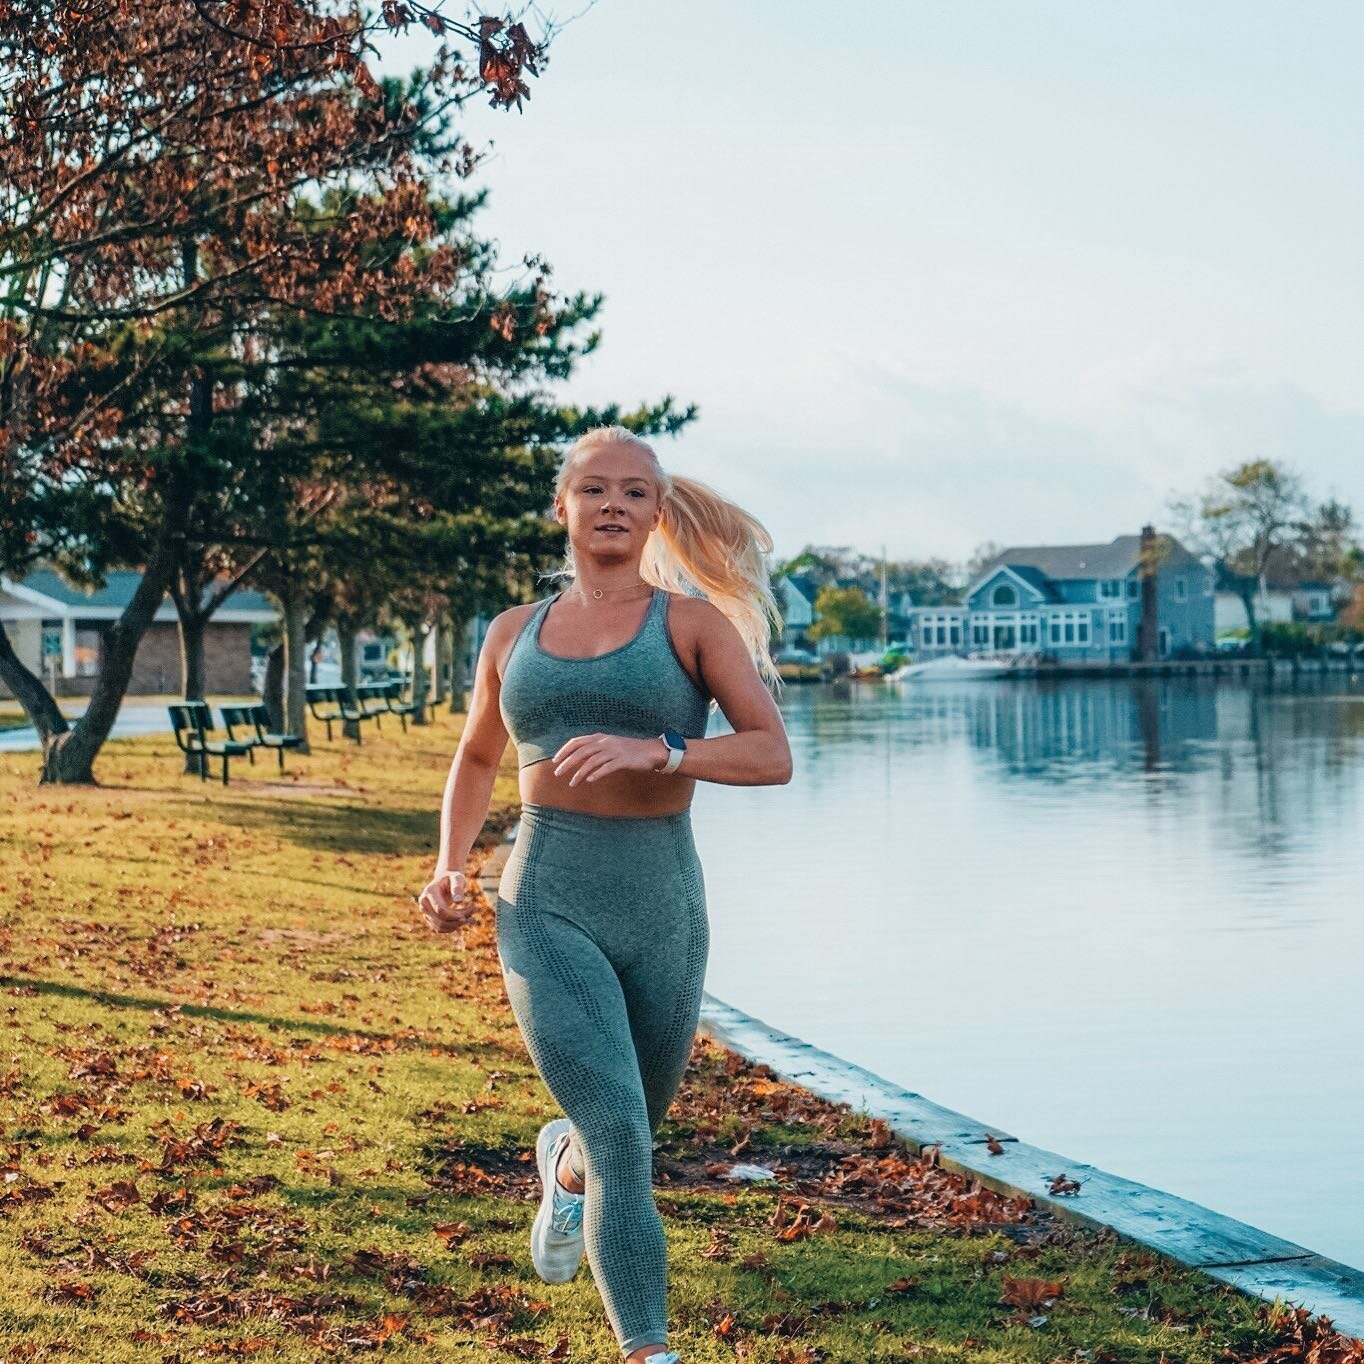 Let's talk about running 🏃🏼&zwj;♀️ 

Fun fact: I used to hate it! I was the kid in middle school who was in last place for the mile test. I dreaded the thought of going for a long-distance run and viewed it as the most boring form of cardio. I carr